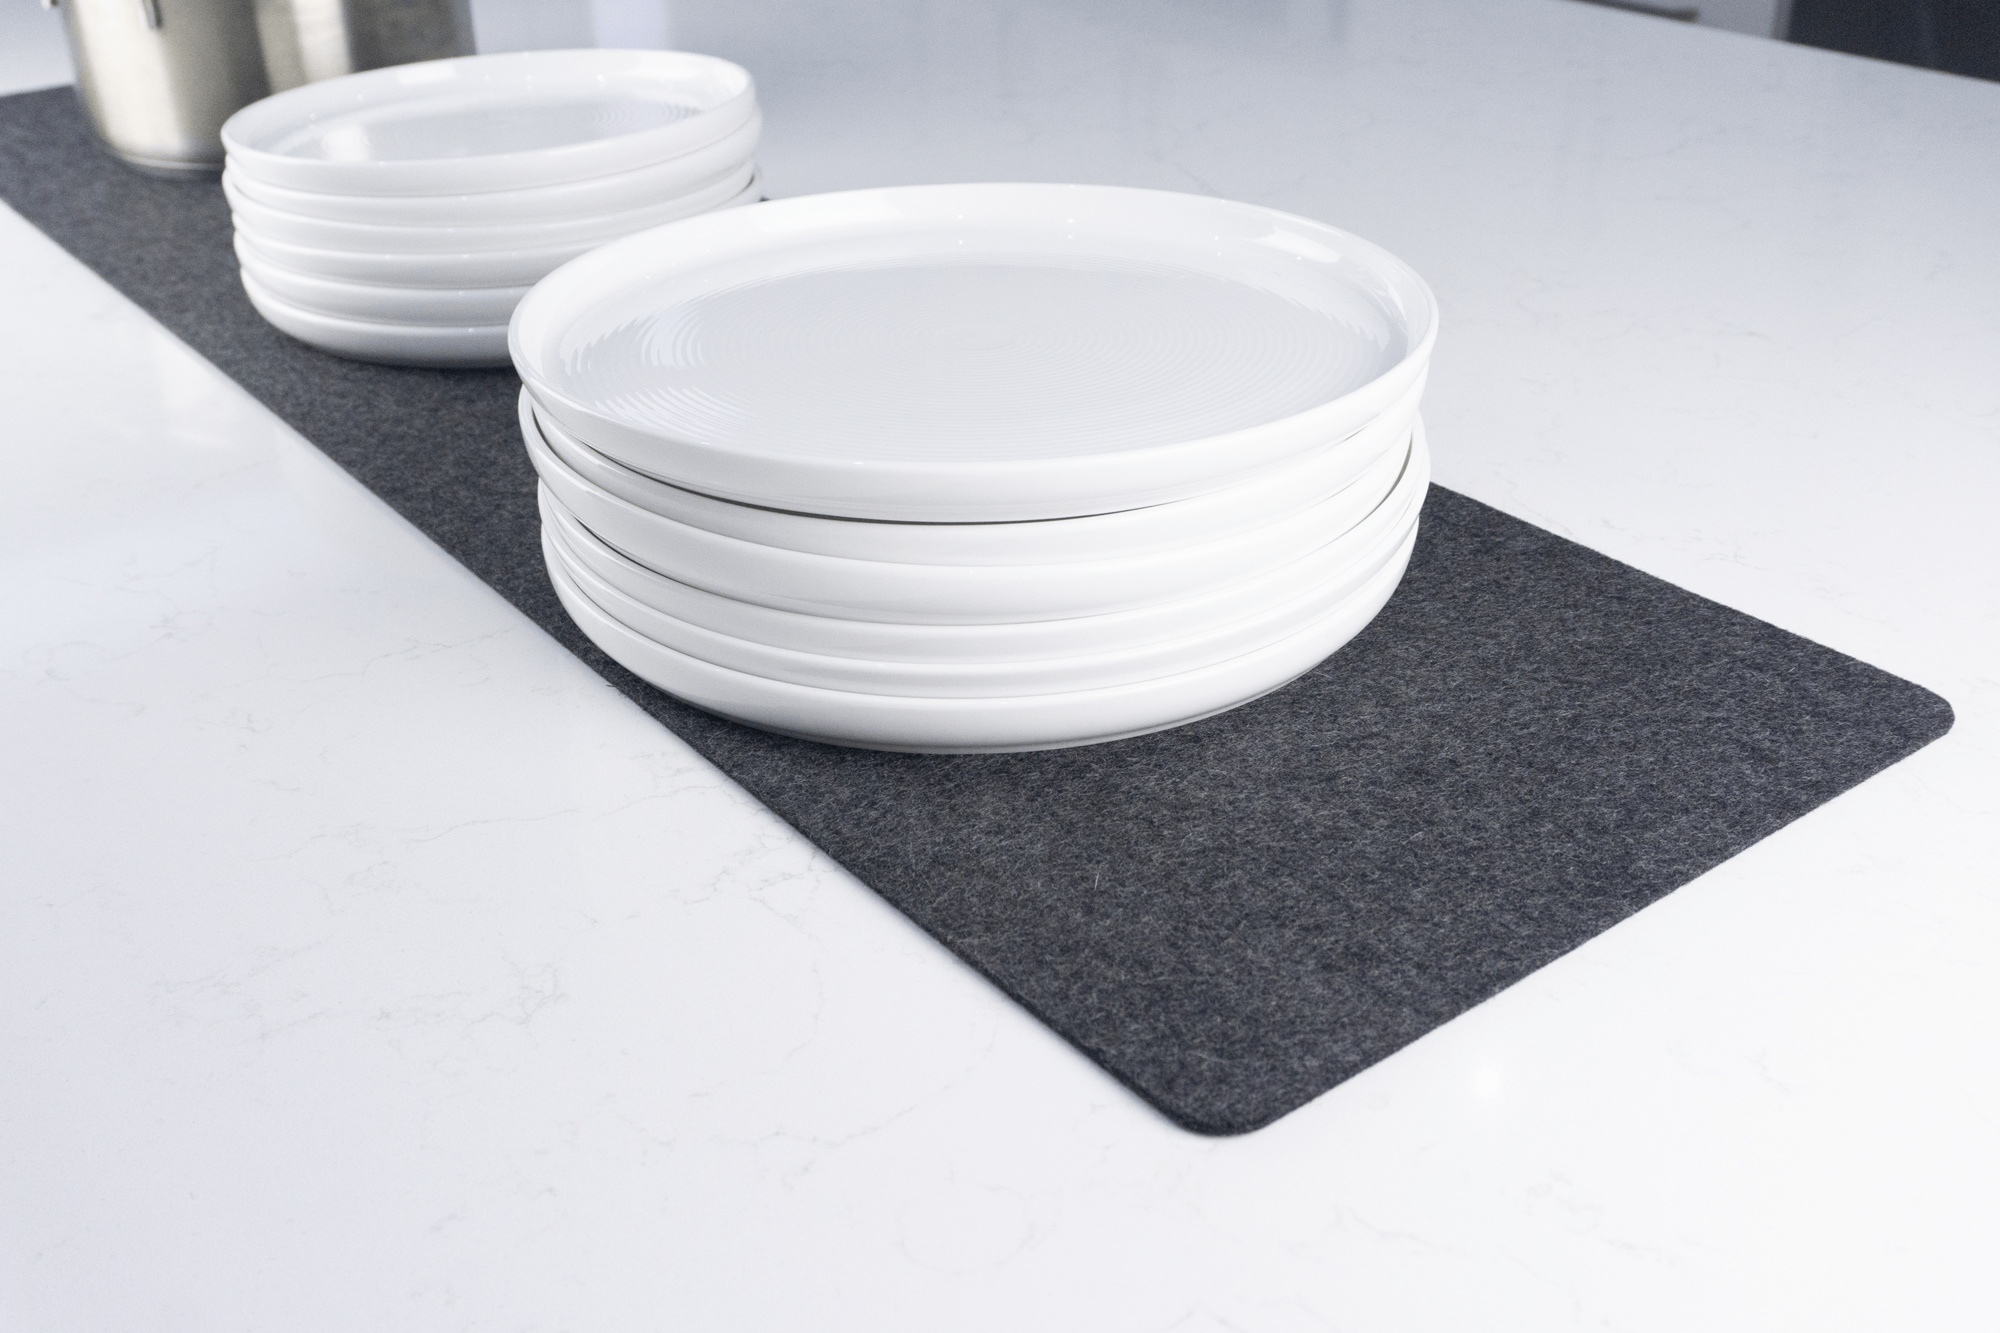 Black wool table runner with stacks of plates on top